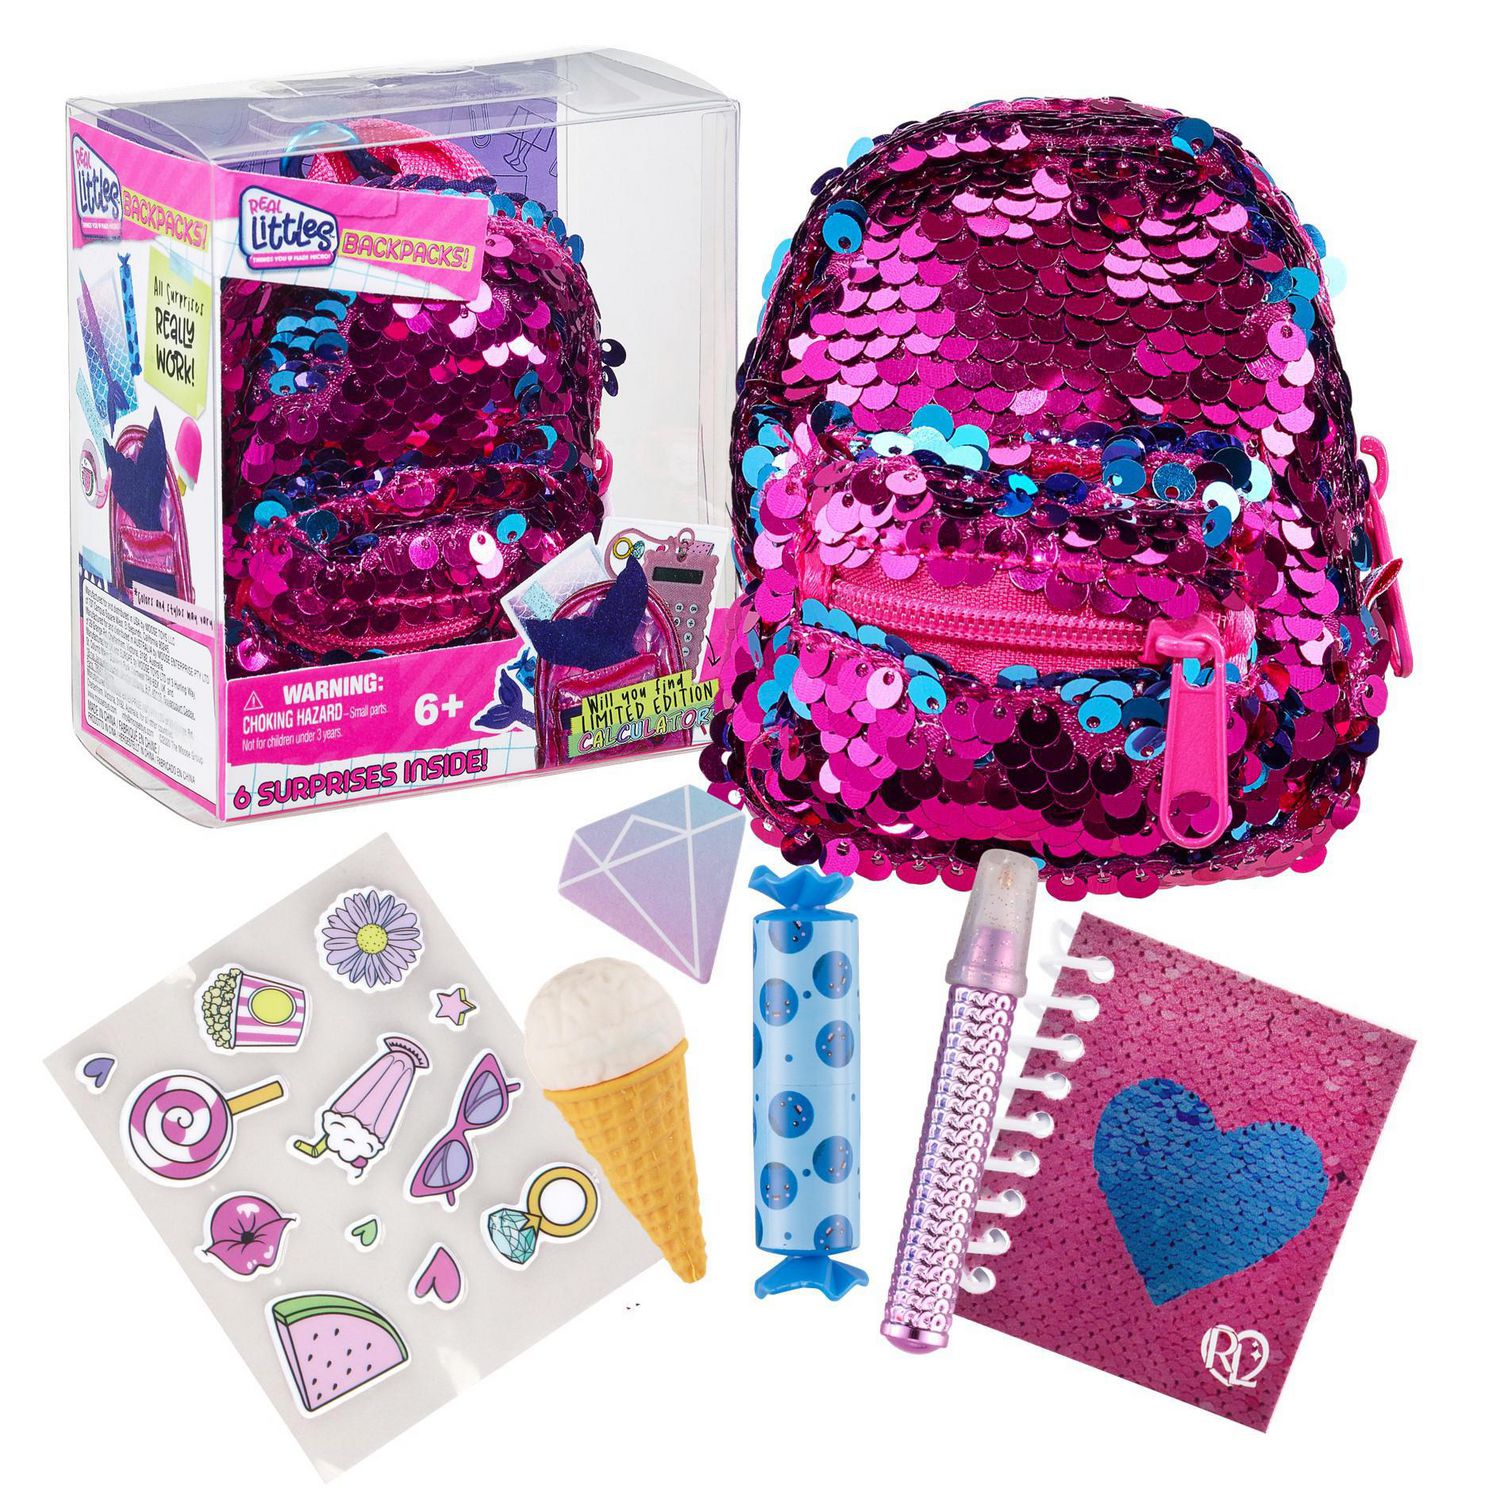 Multicolor REAL LITTLES 25324 Collectible Micro Backpack and Micro Handbag with 12 Micro Working Surprises Inside! 